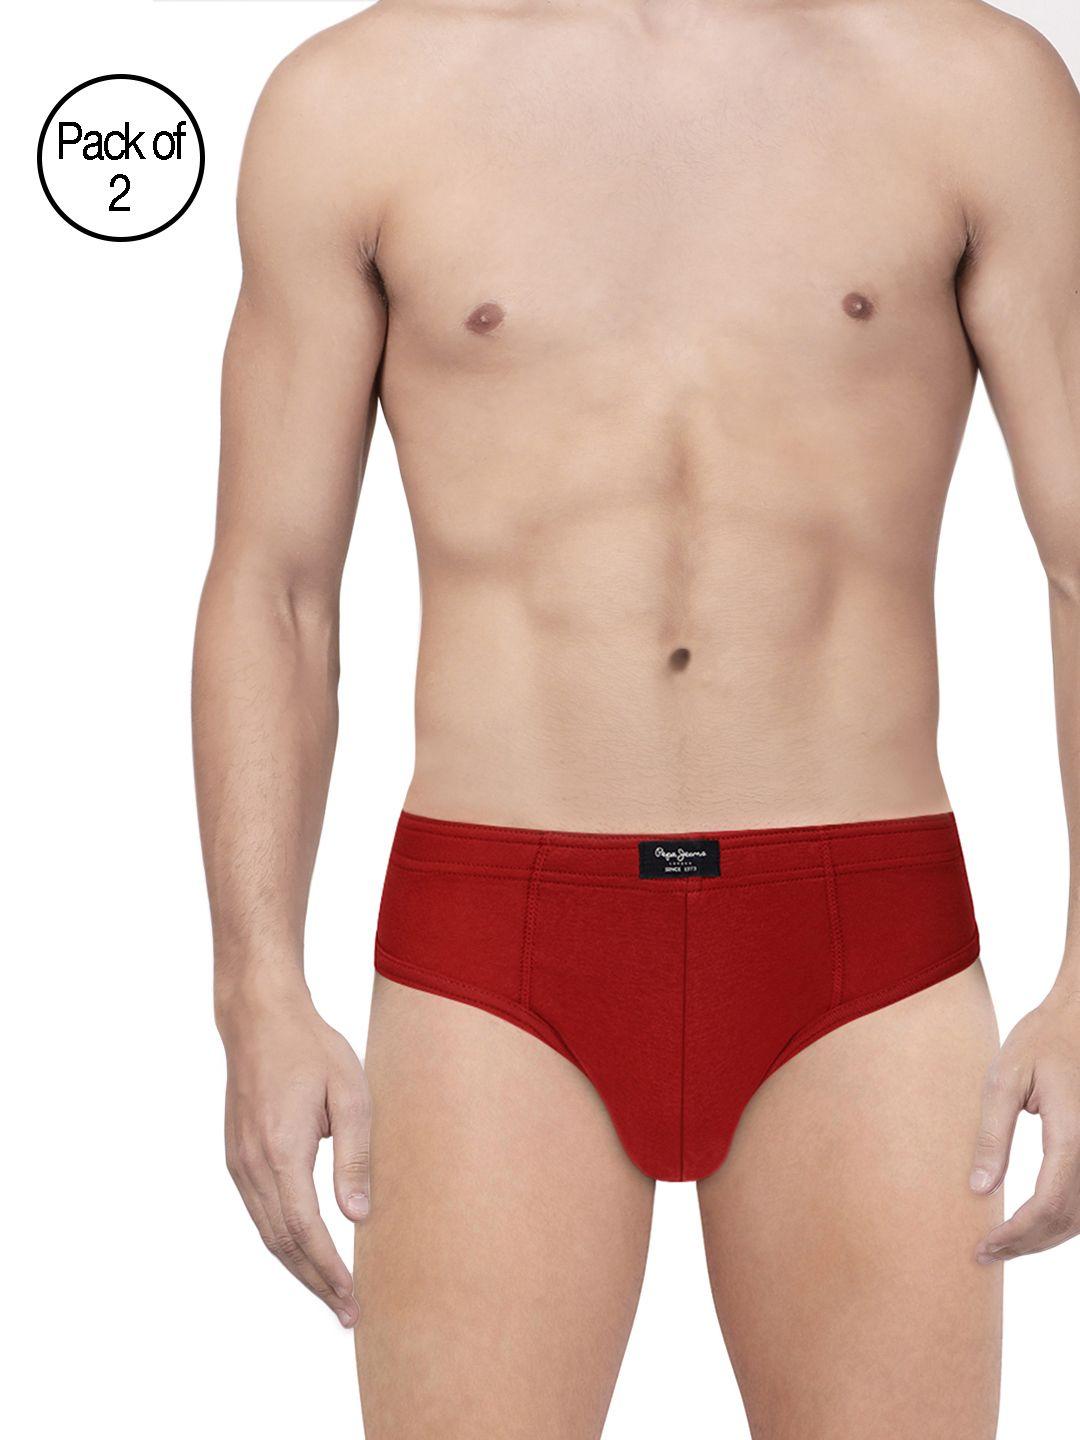 pepe jeans men pack of 2 red briefs 8904311300076